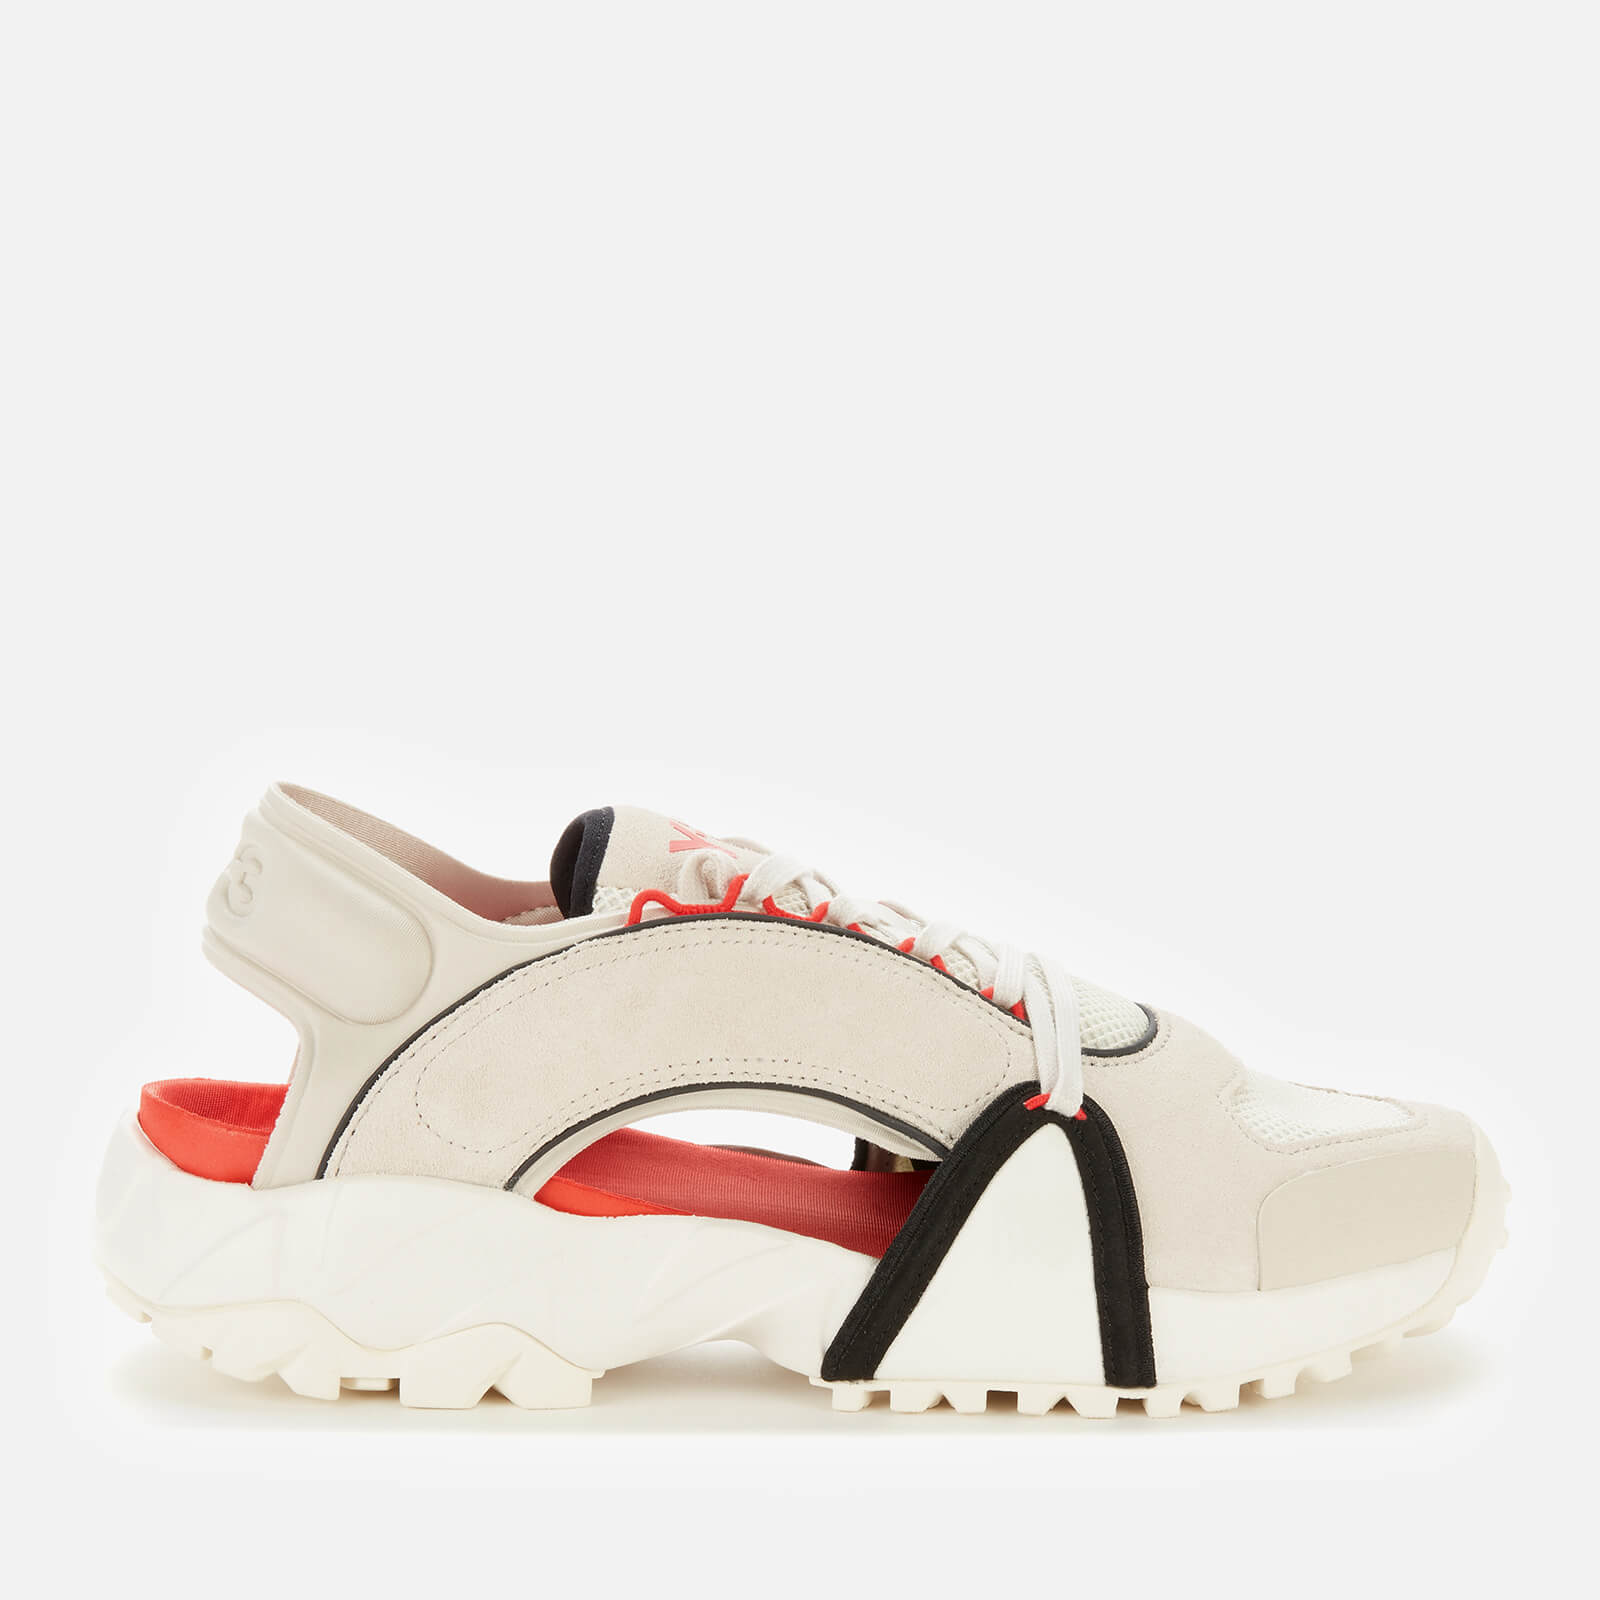 Y-3 Men's Notoma Sandals - Clear Brown/Off White/Red - UK 7